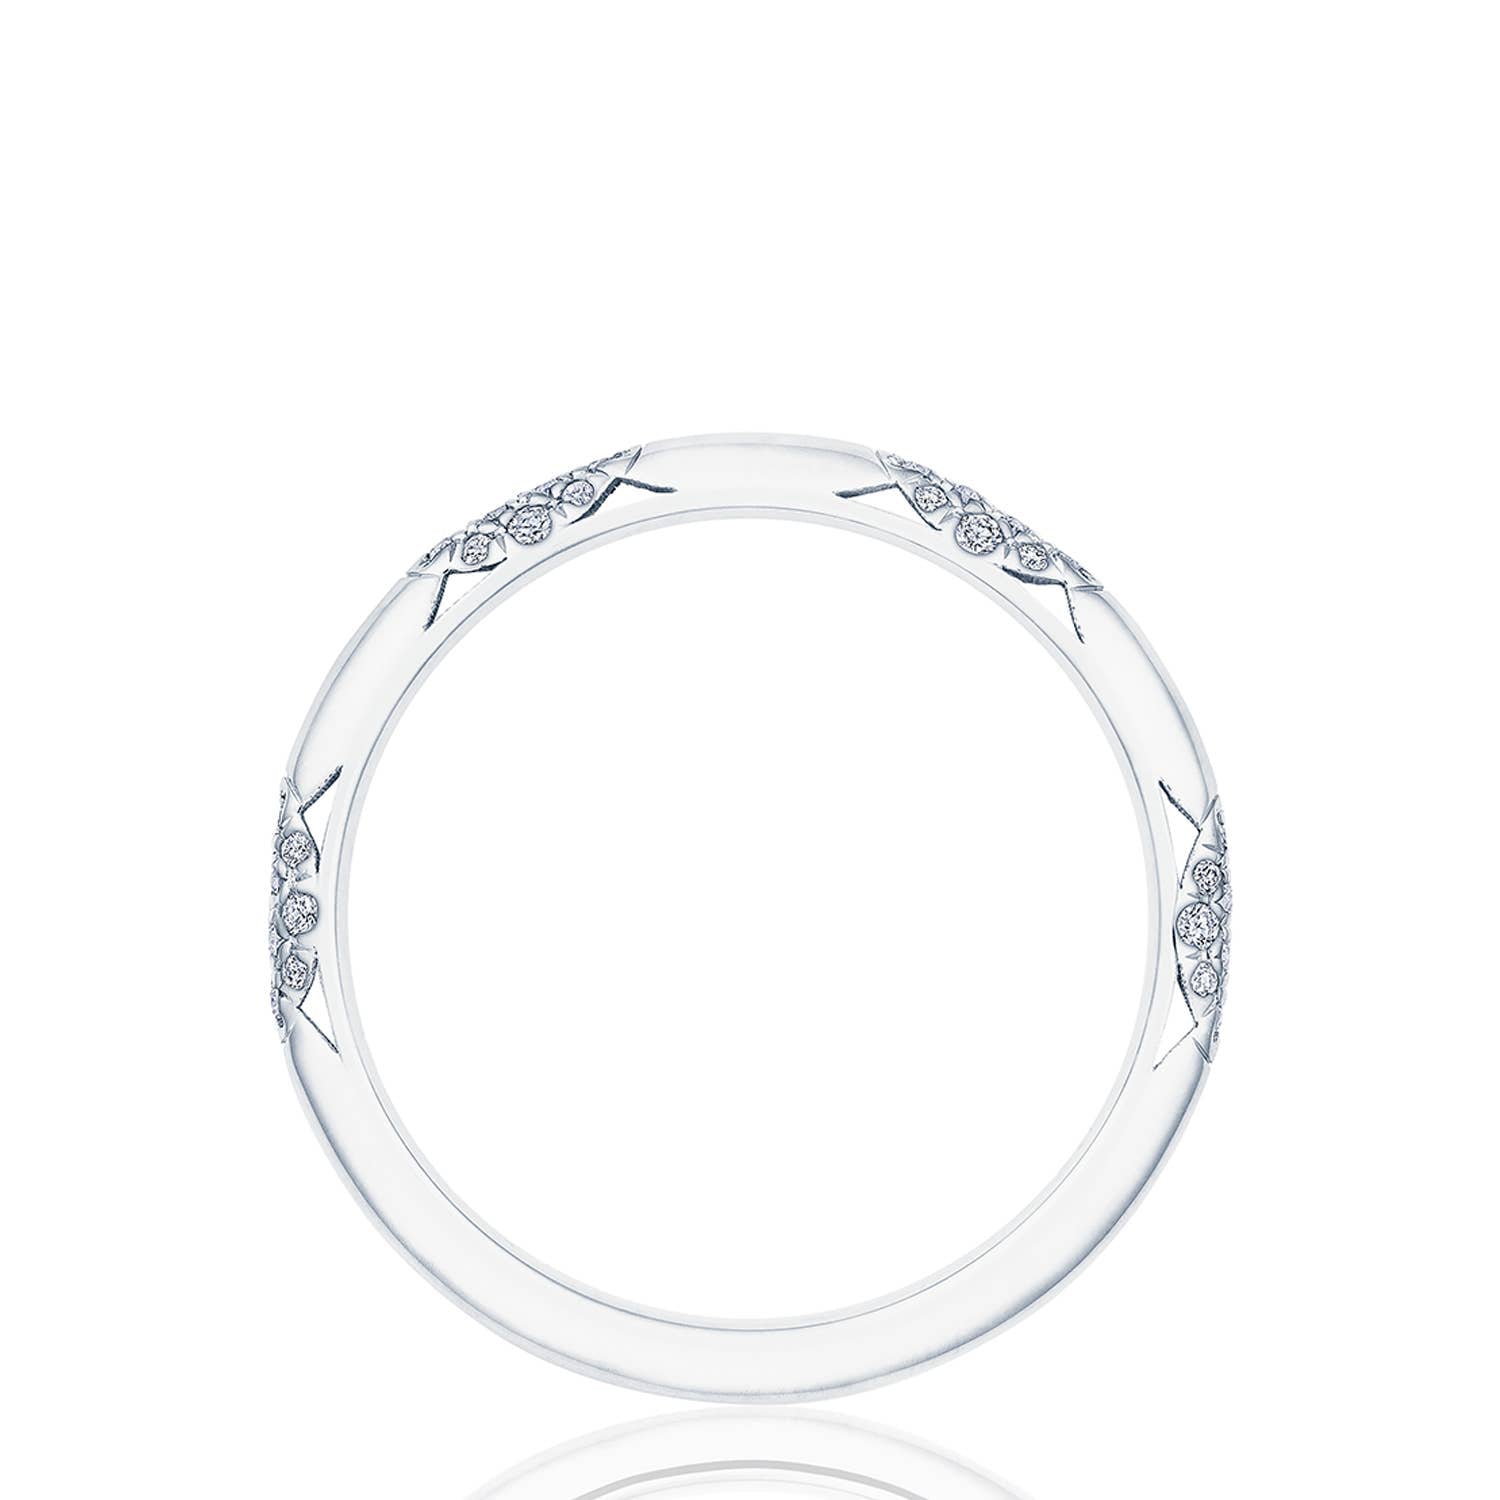 Founder's Collection | 360° Foundation Wedding Band HT2582B12